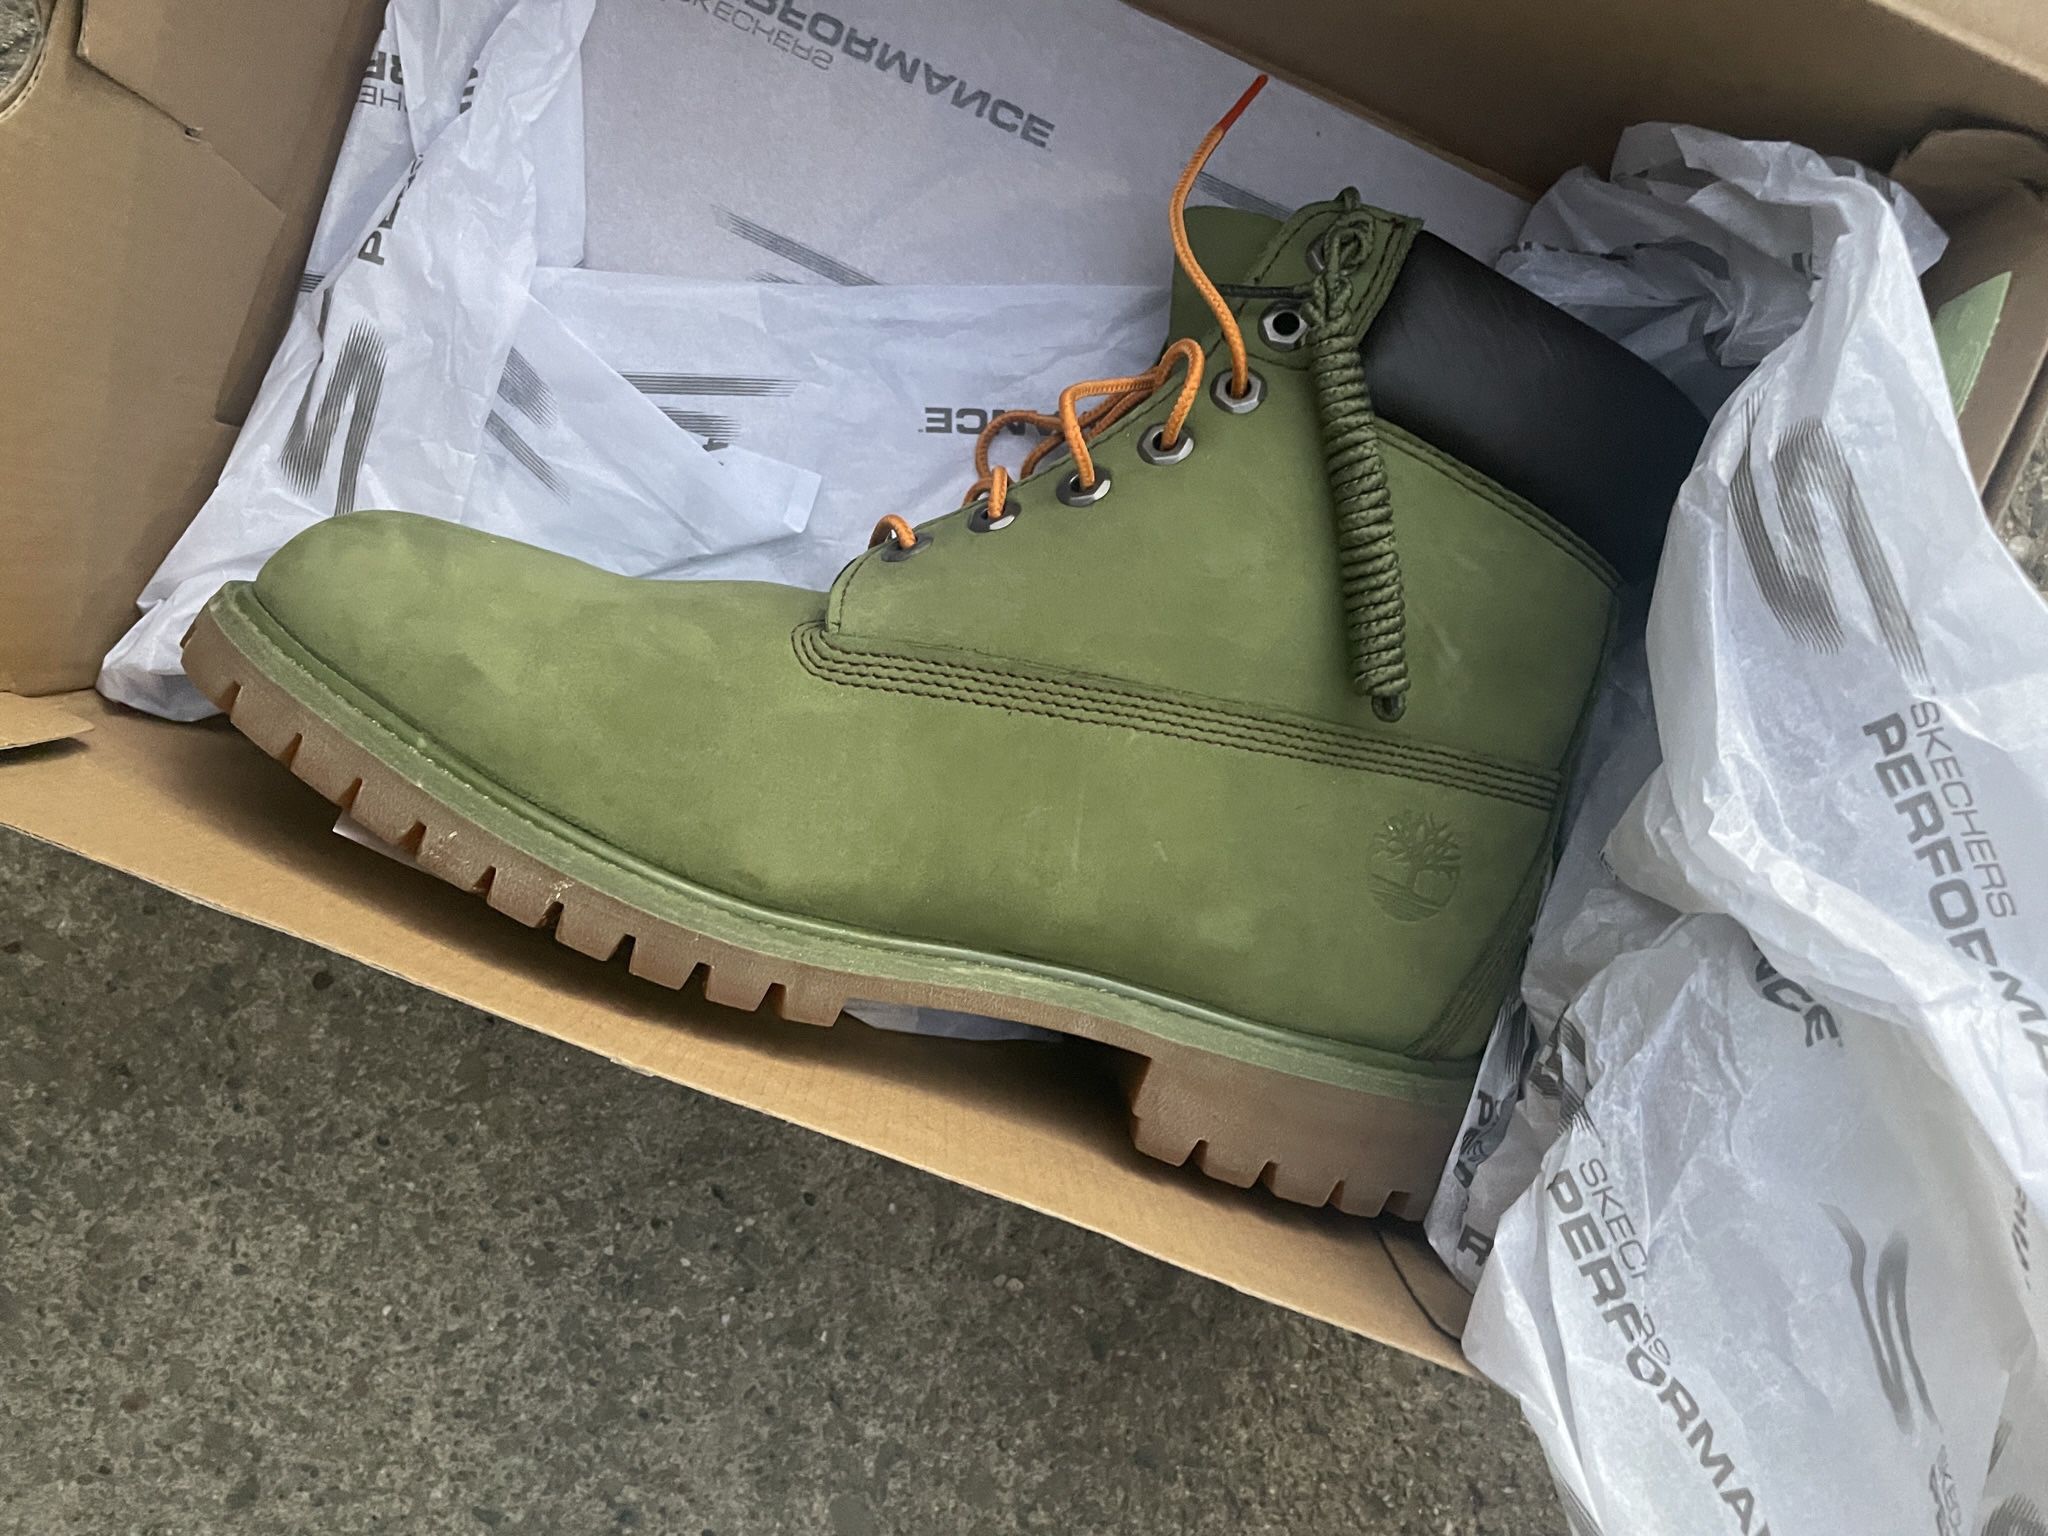  $100  Olive Green Nubuck Timberlands 6” Boots 